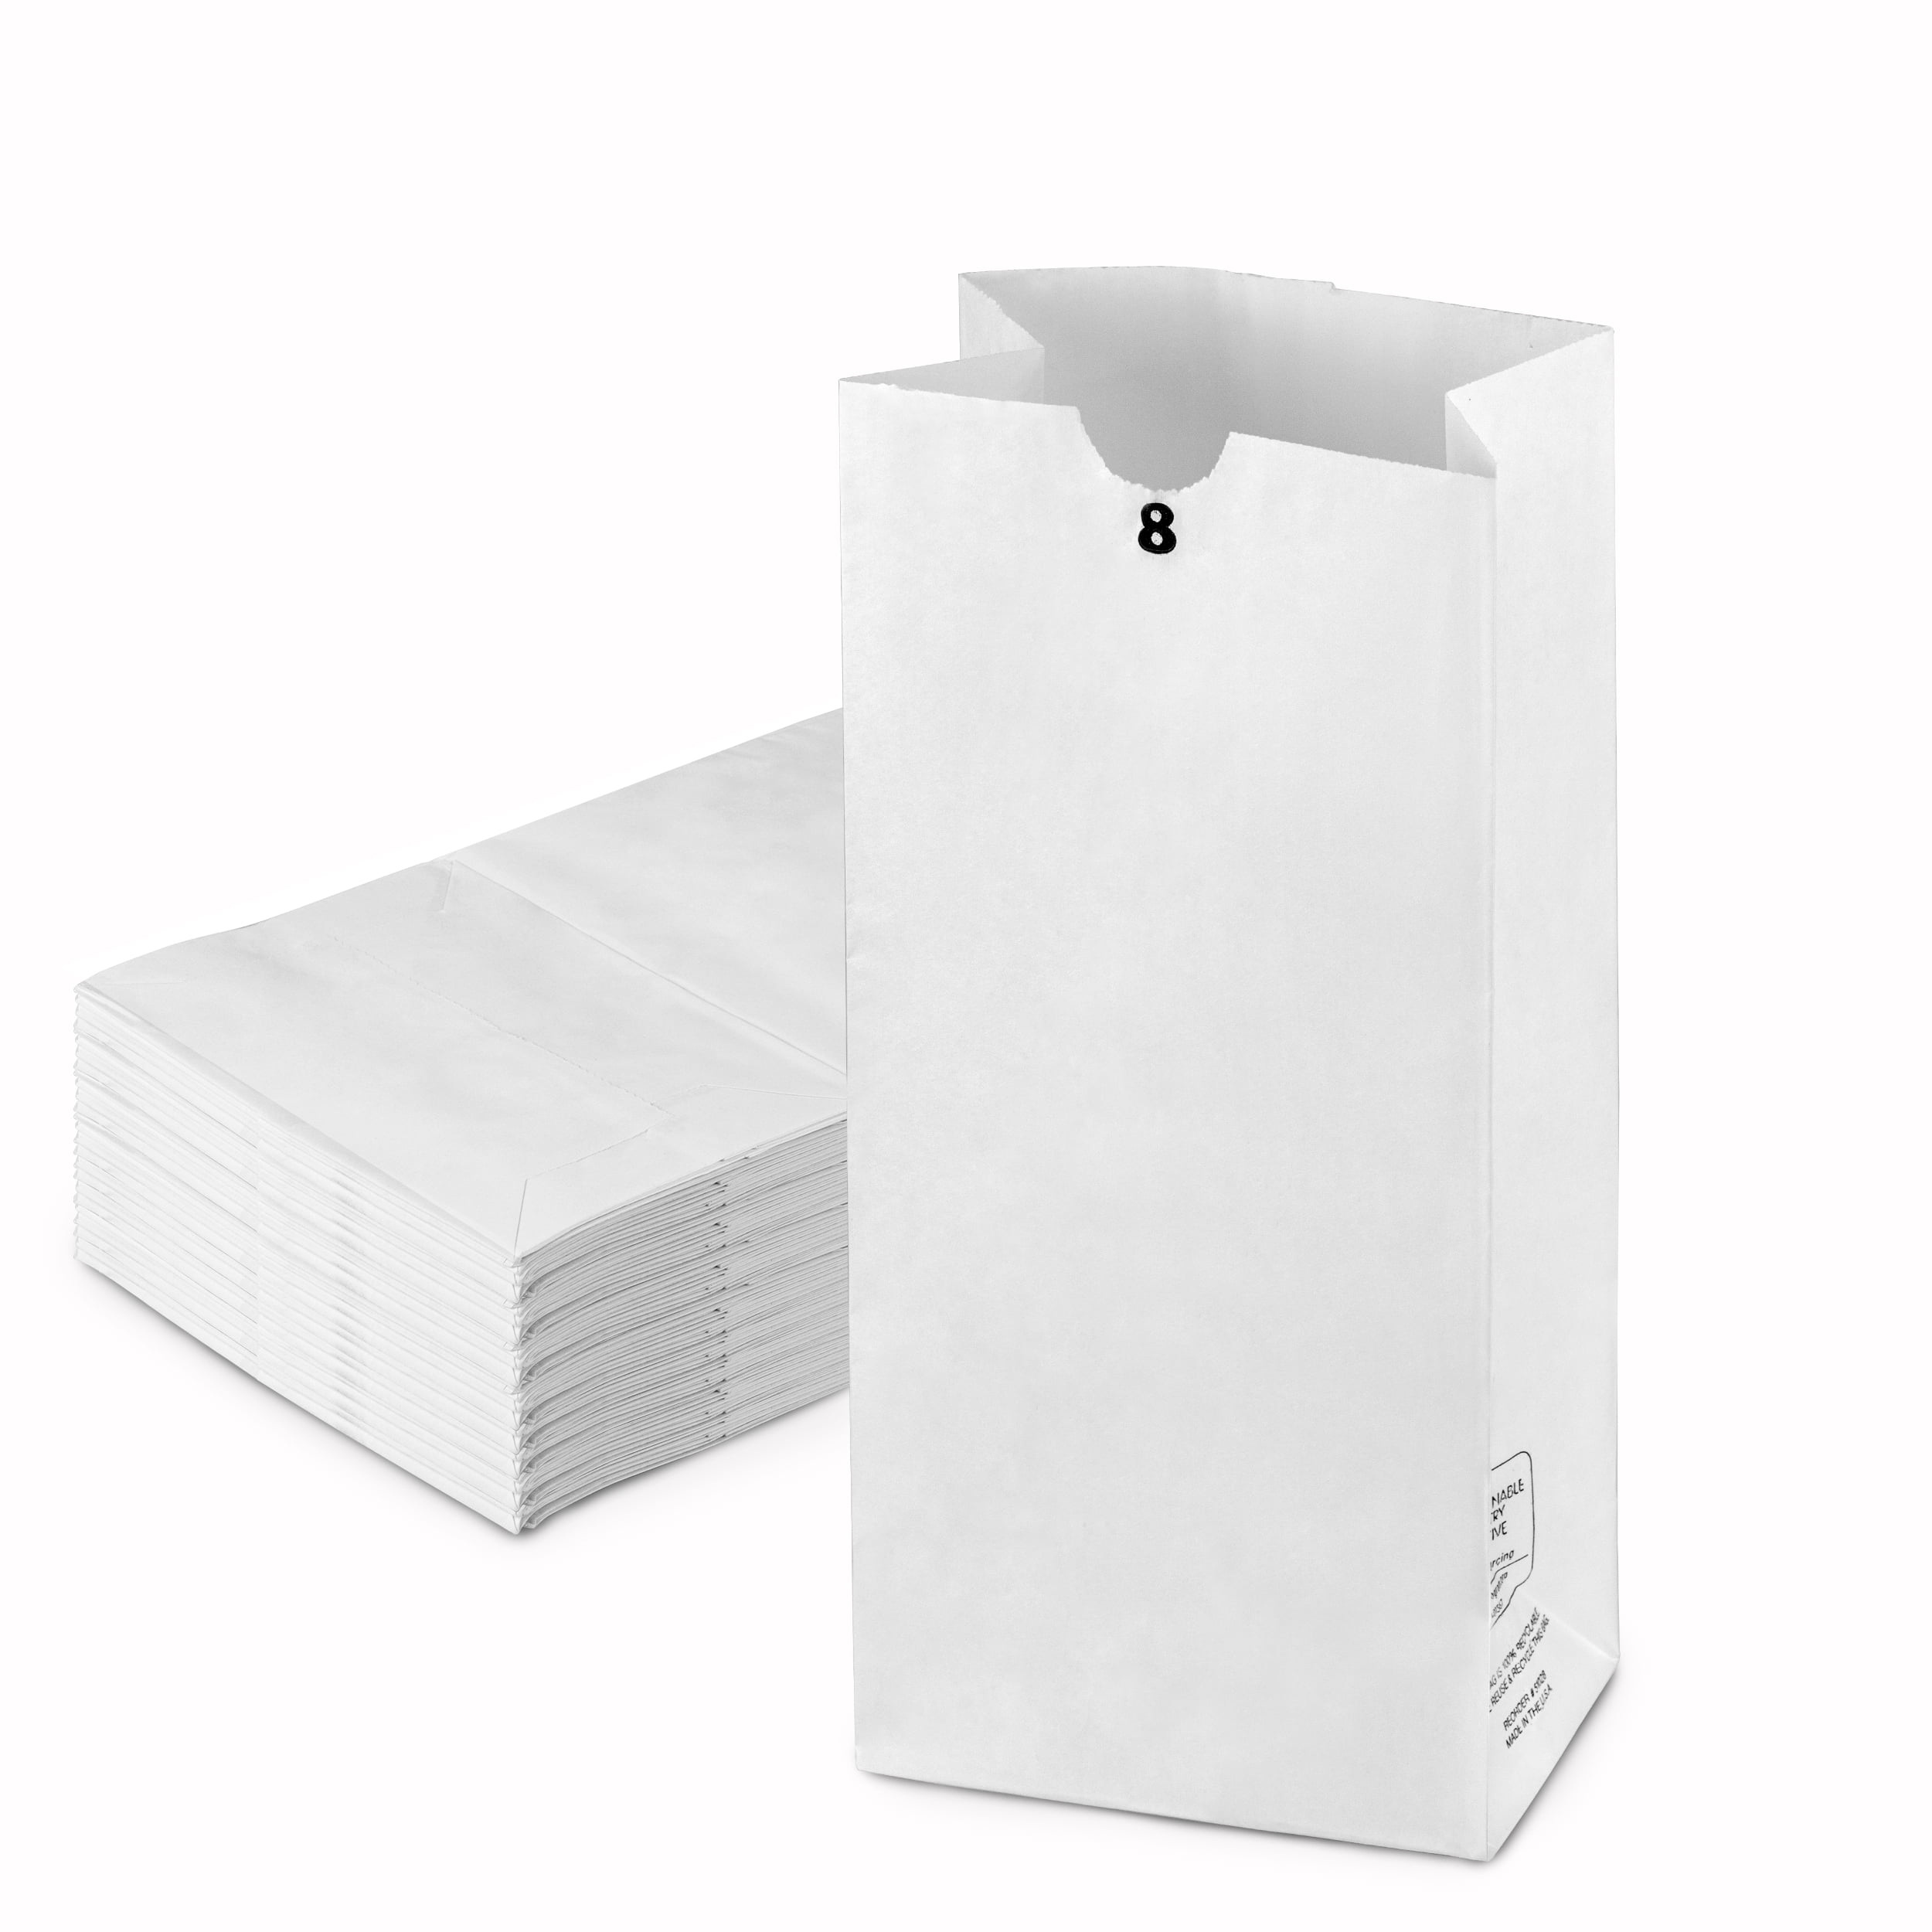 2 LB 7.88 x 4.13 x 2.5 White Paper Bags Grocery Lunch Retail Shopping Durable Bleached Barrel Sack 500 Pack 